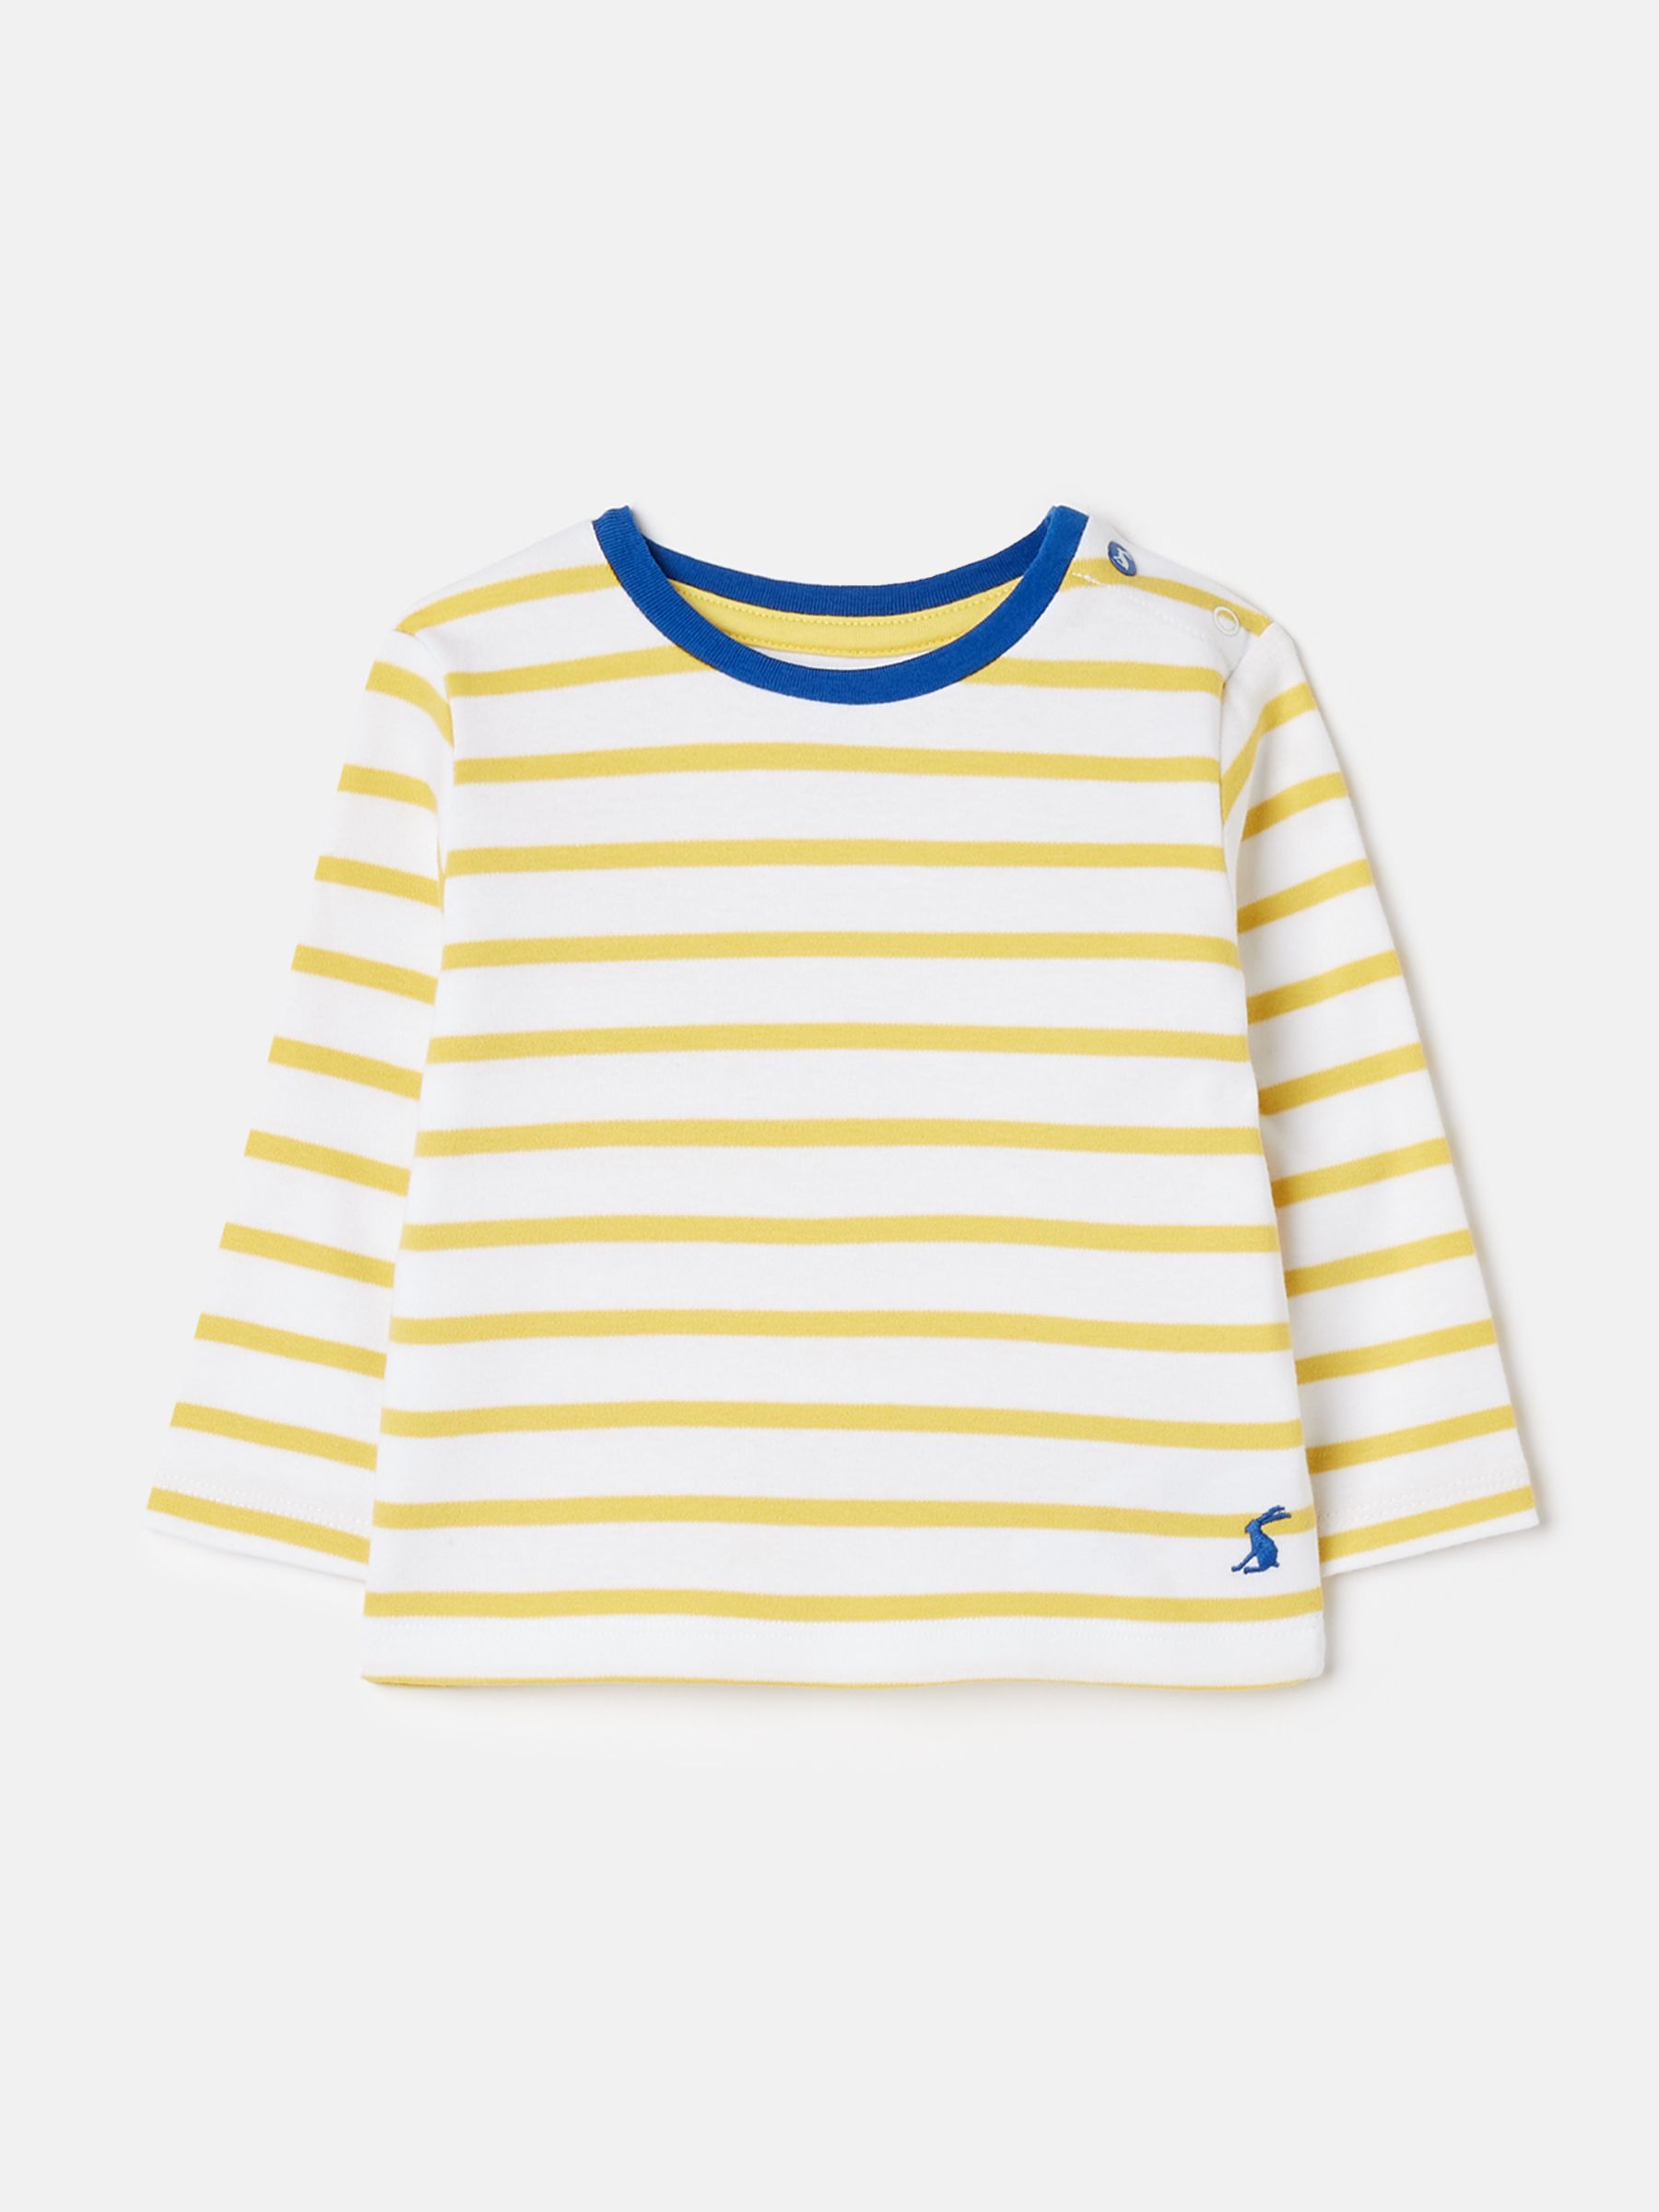 Buy Joules Long Sleeve Tshirt from the Joules online shop